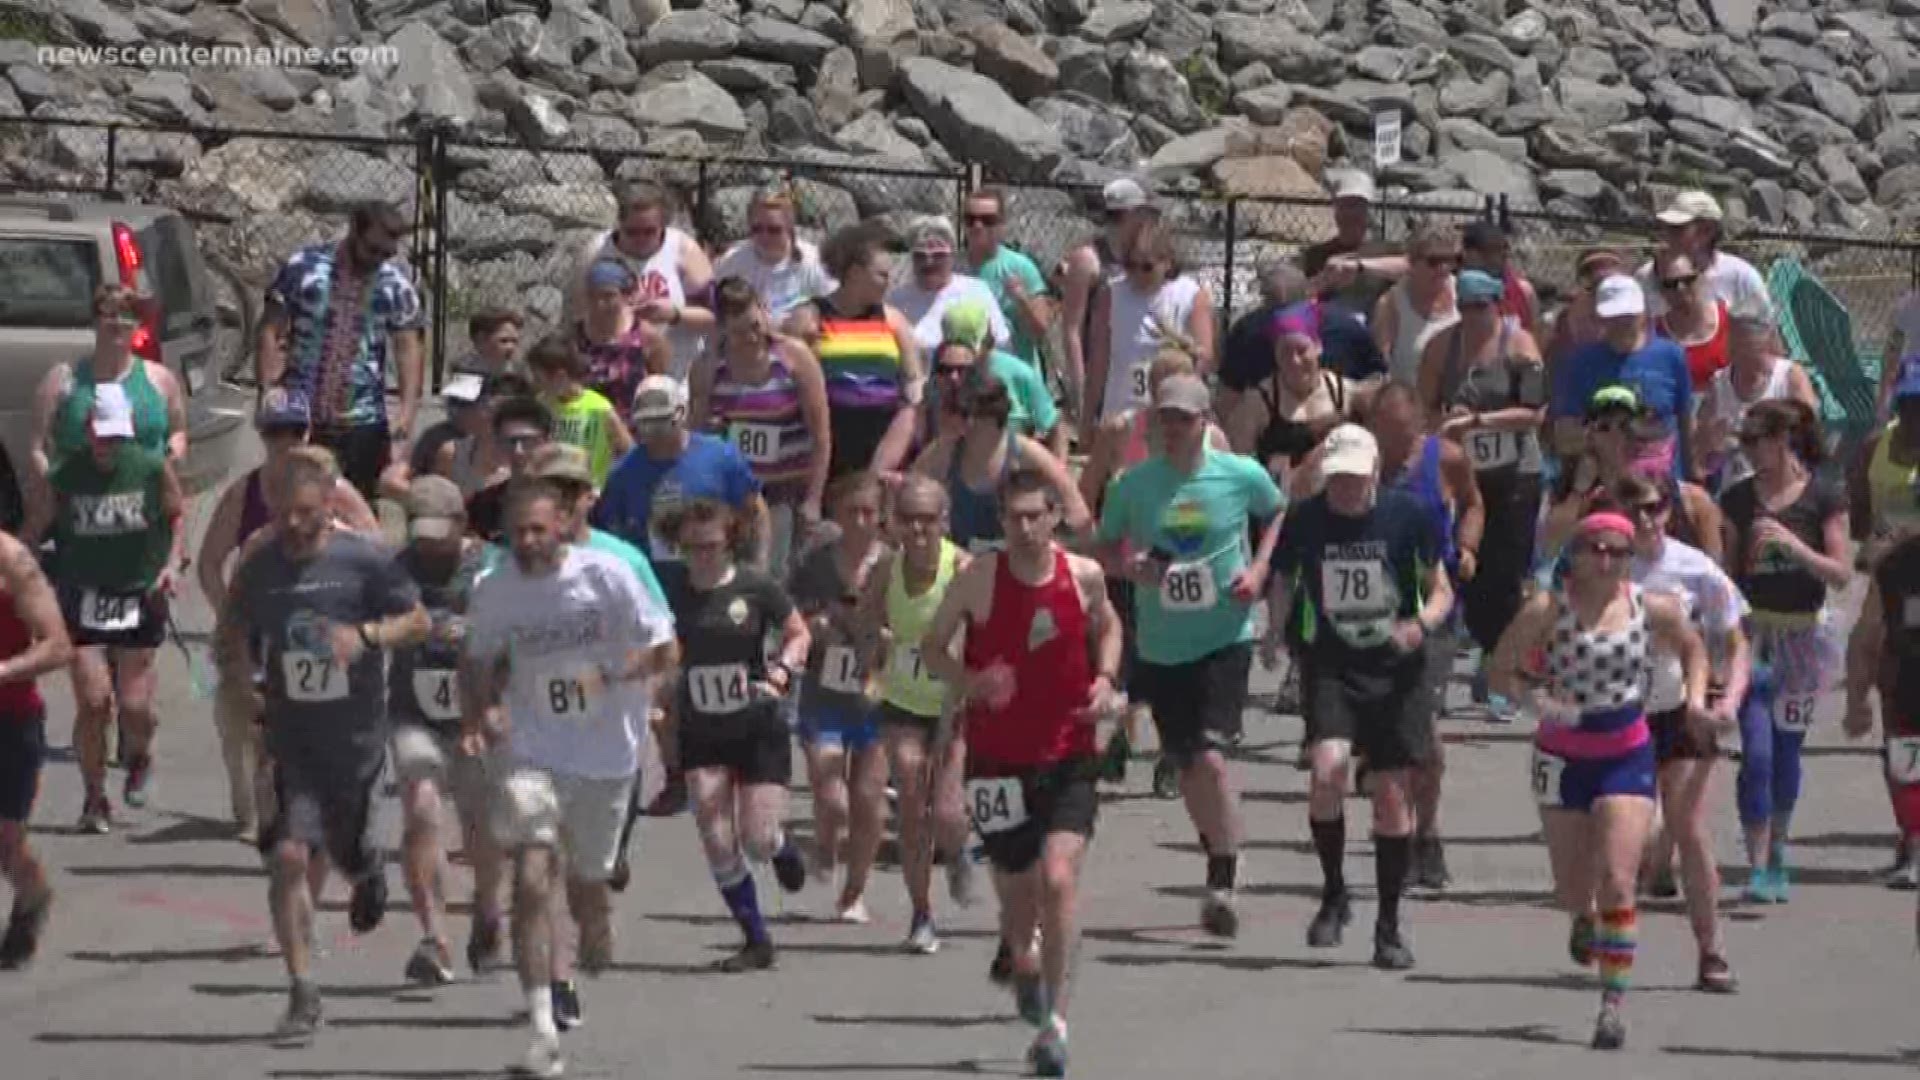 More than one-hundred runners and walkers took part in the Rainbow Run 5-k in Orono.